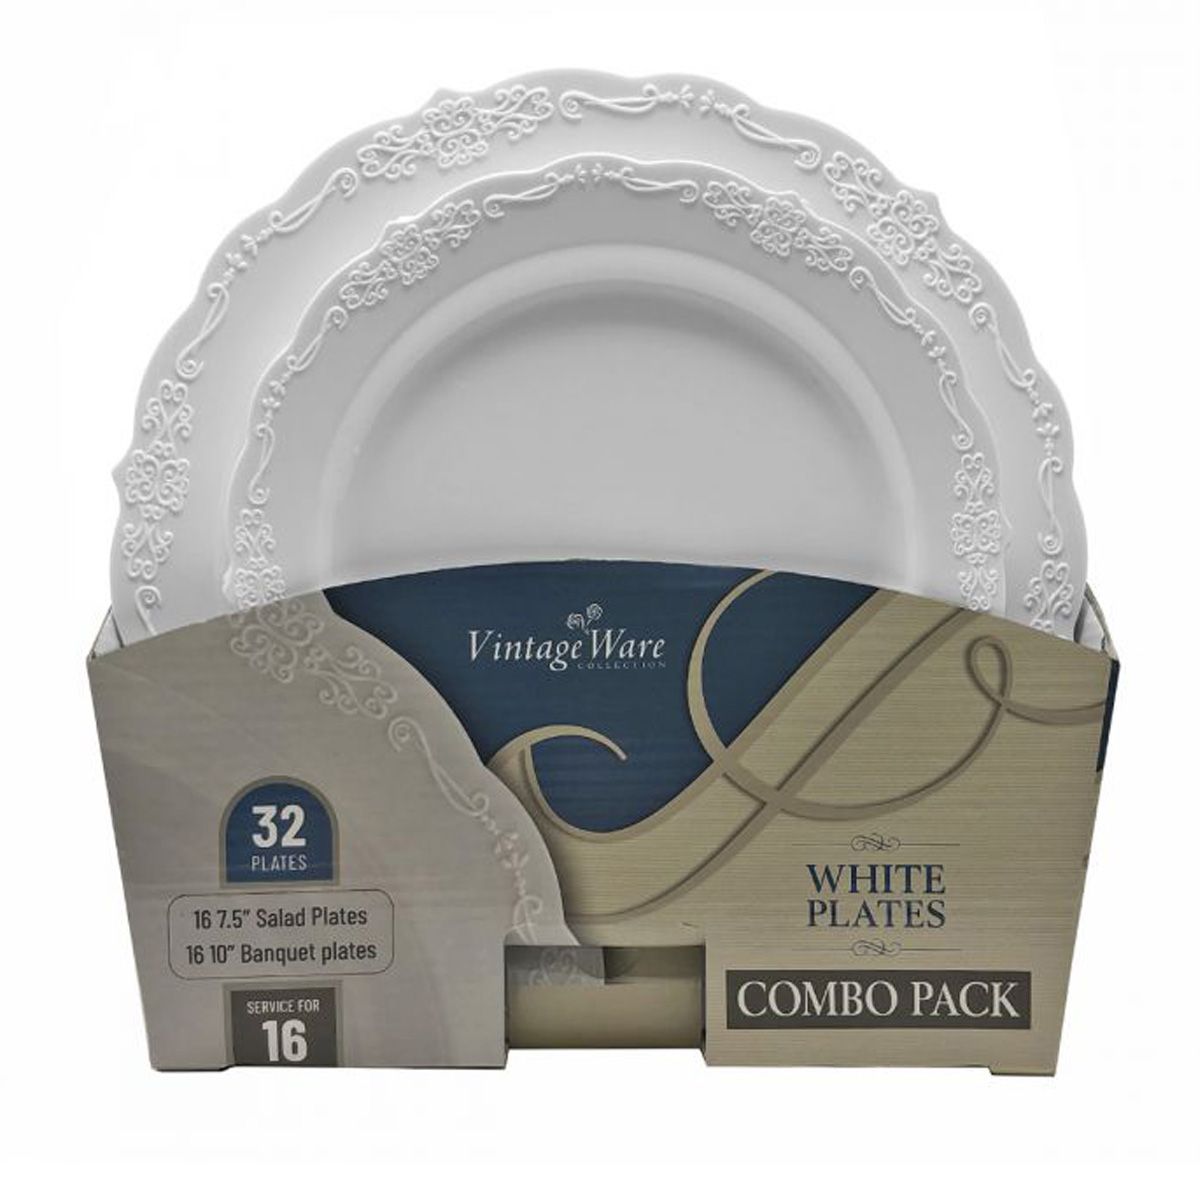 Modernware Paper Plates, Heavy Duty, 15 Count, 8.75 (32 Pack)